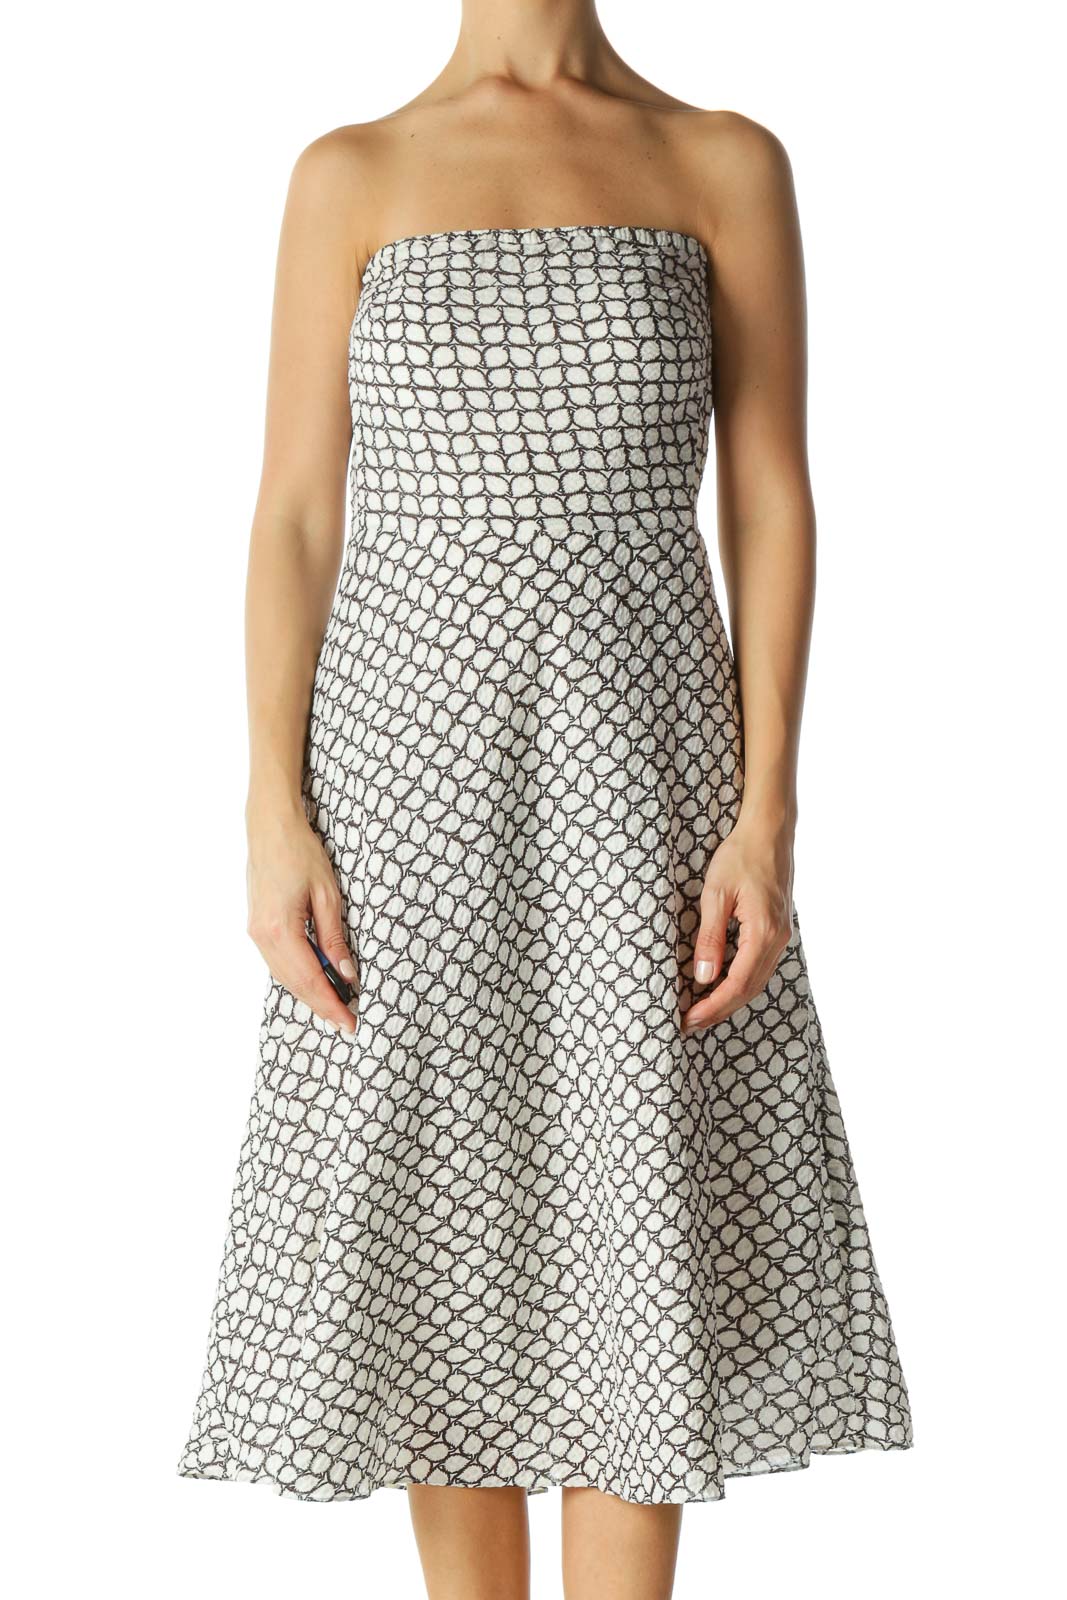 White & Brown Patterned Strapless Dress Front